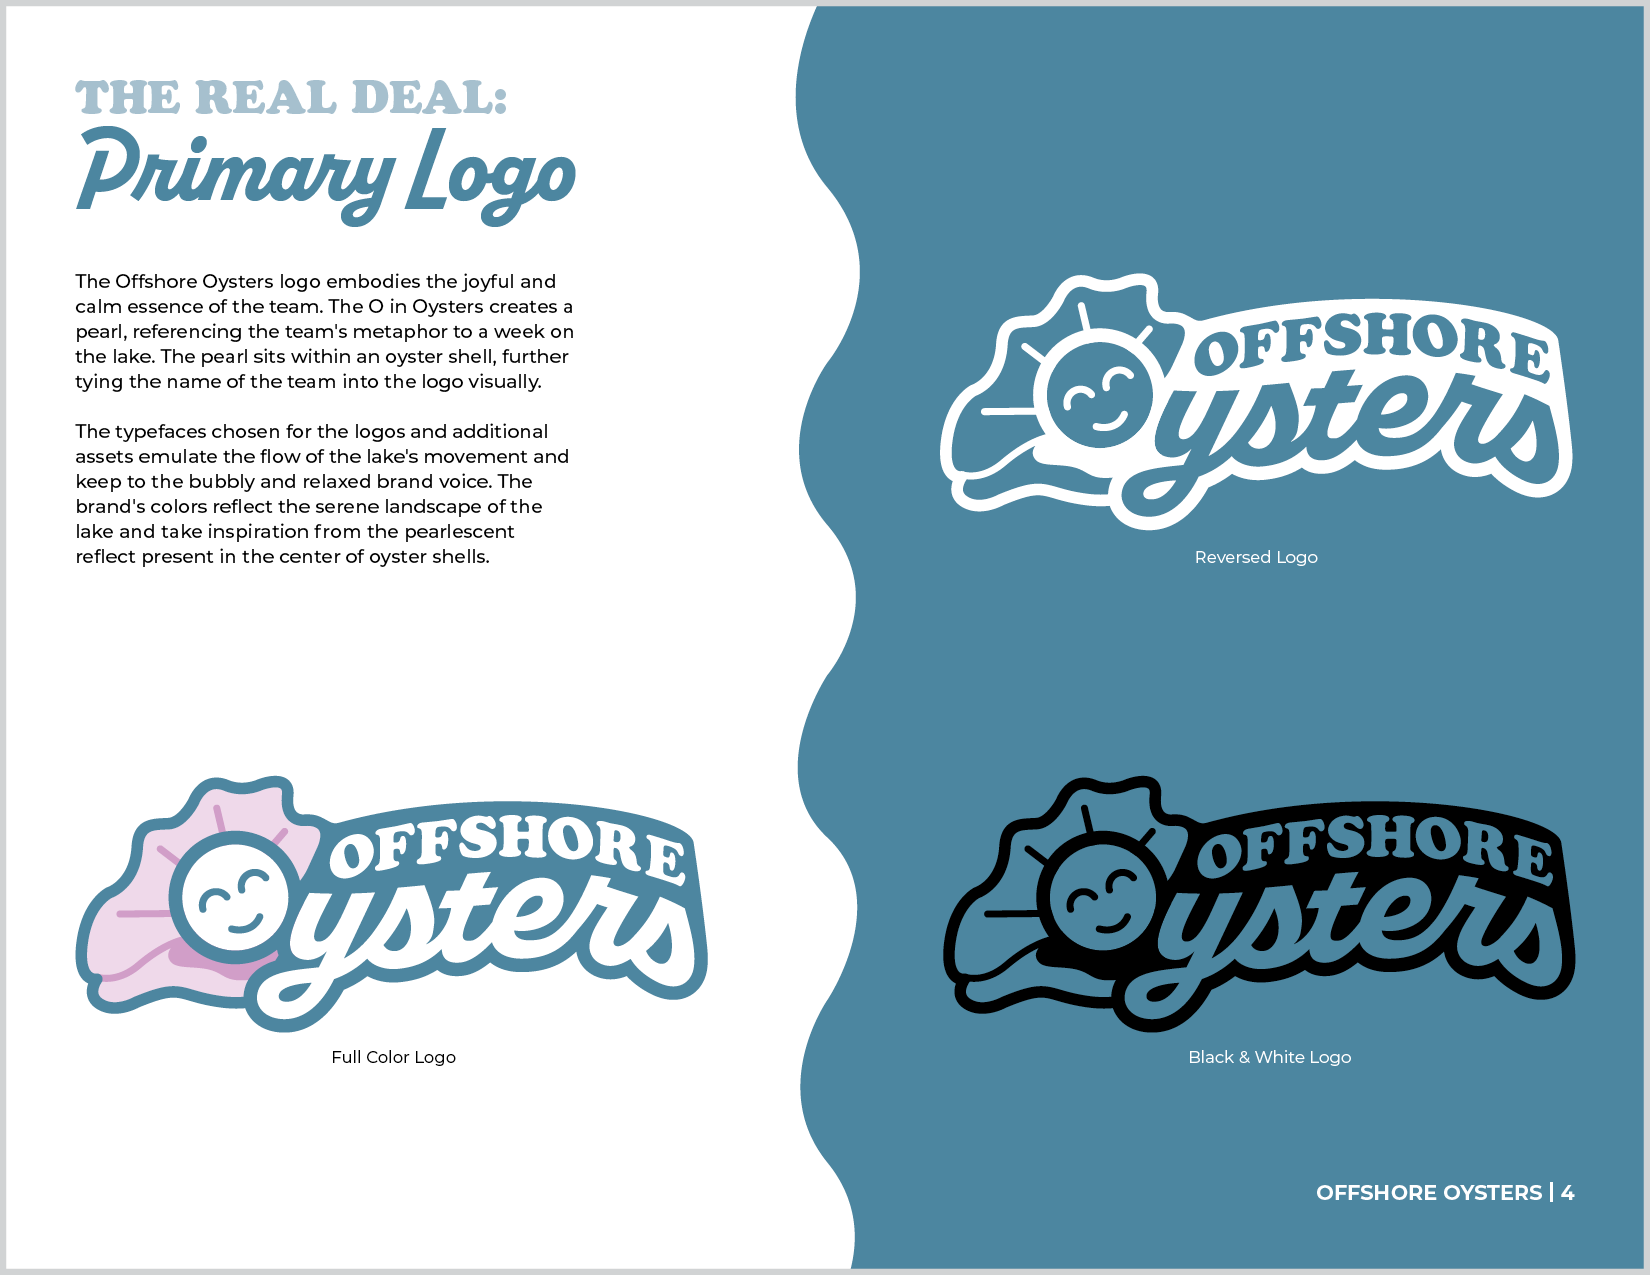 Offshore Oysters brand guideline primary logo.